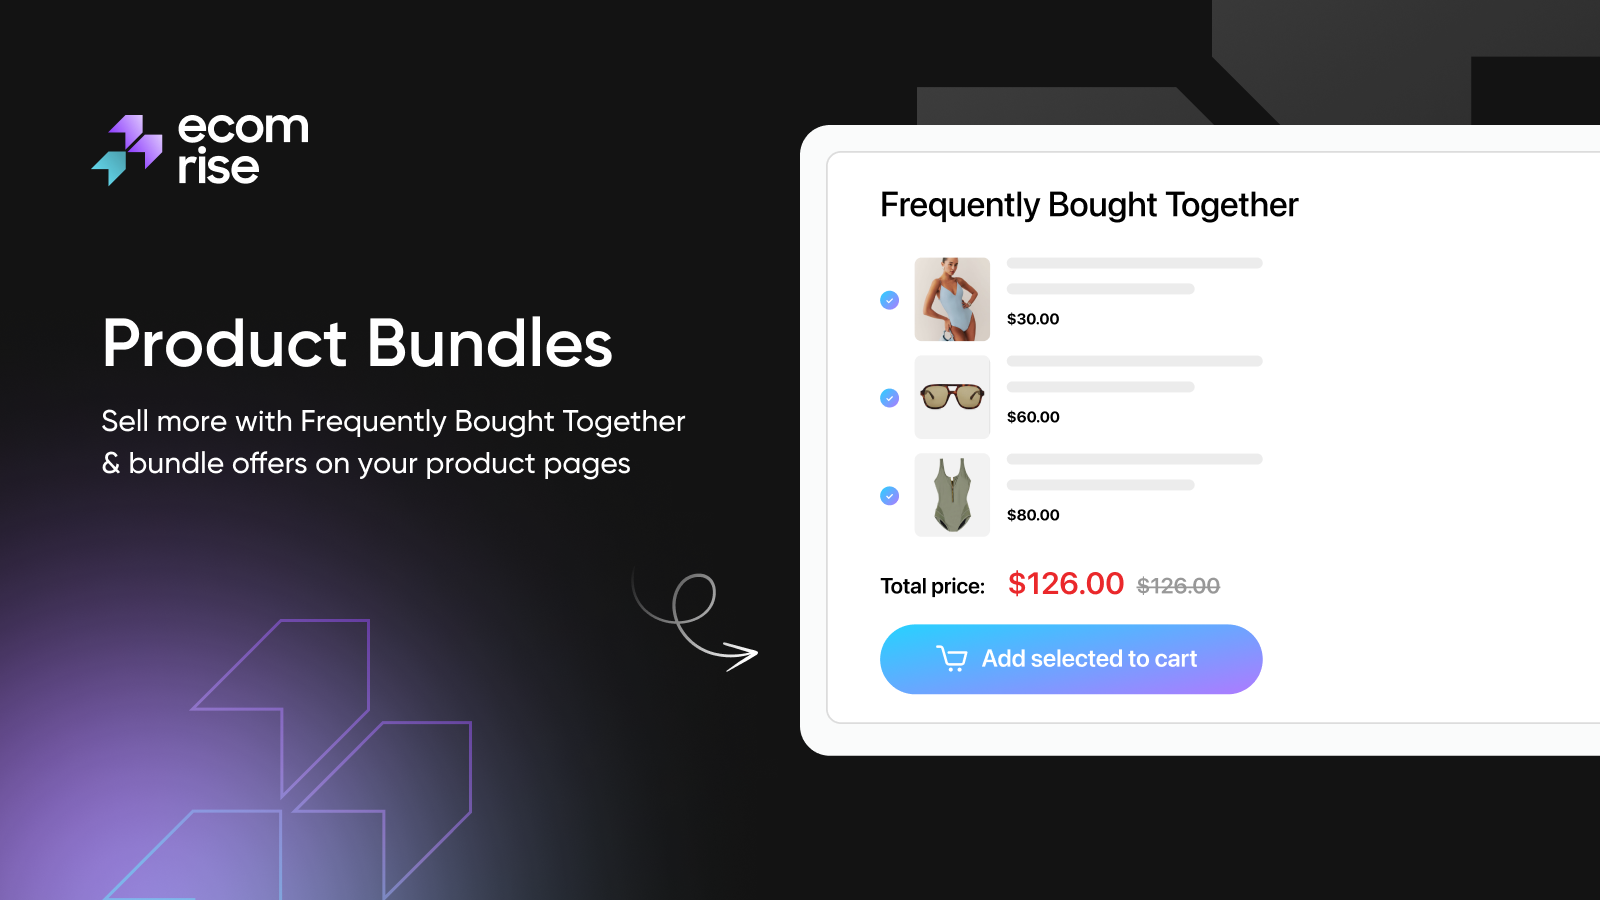 Product Bundles & frequently bought together